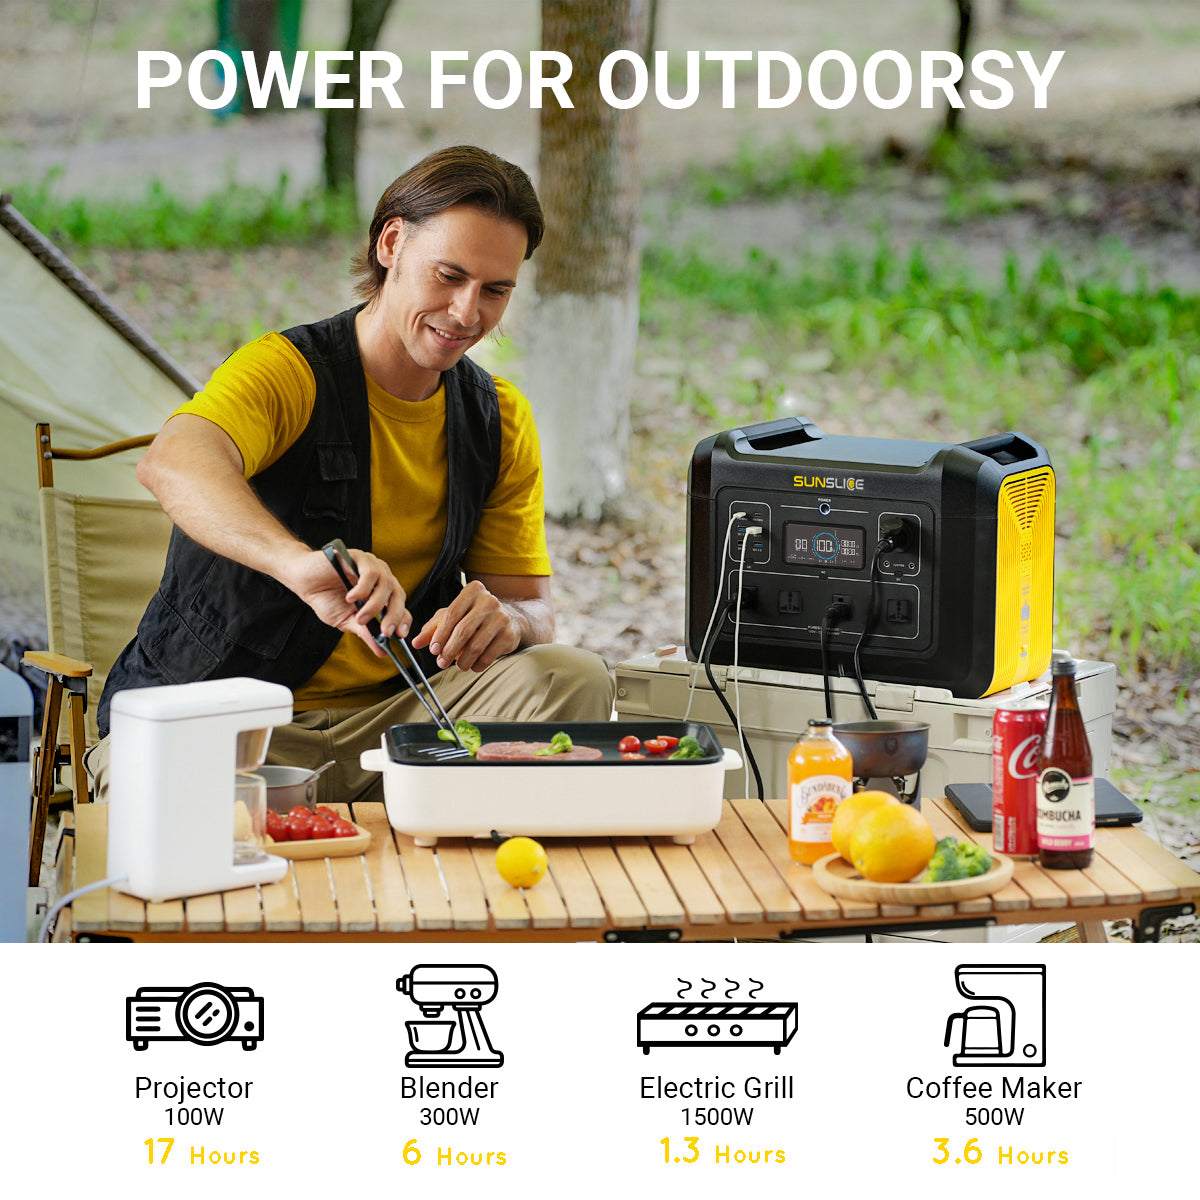 man cooking outdoors with a generator